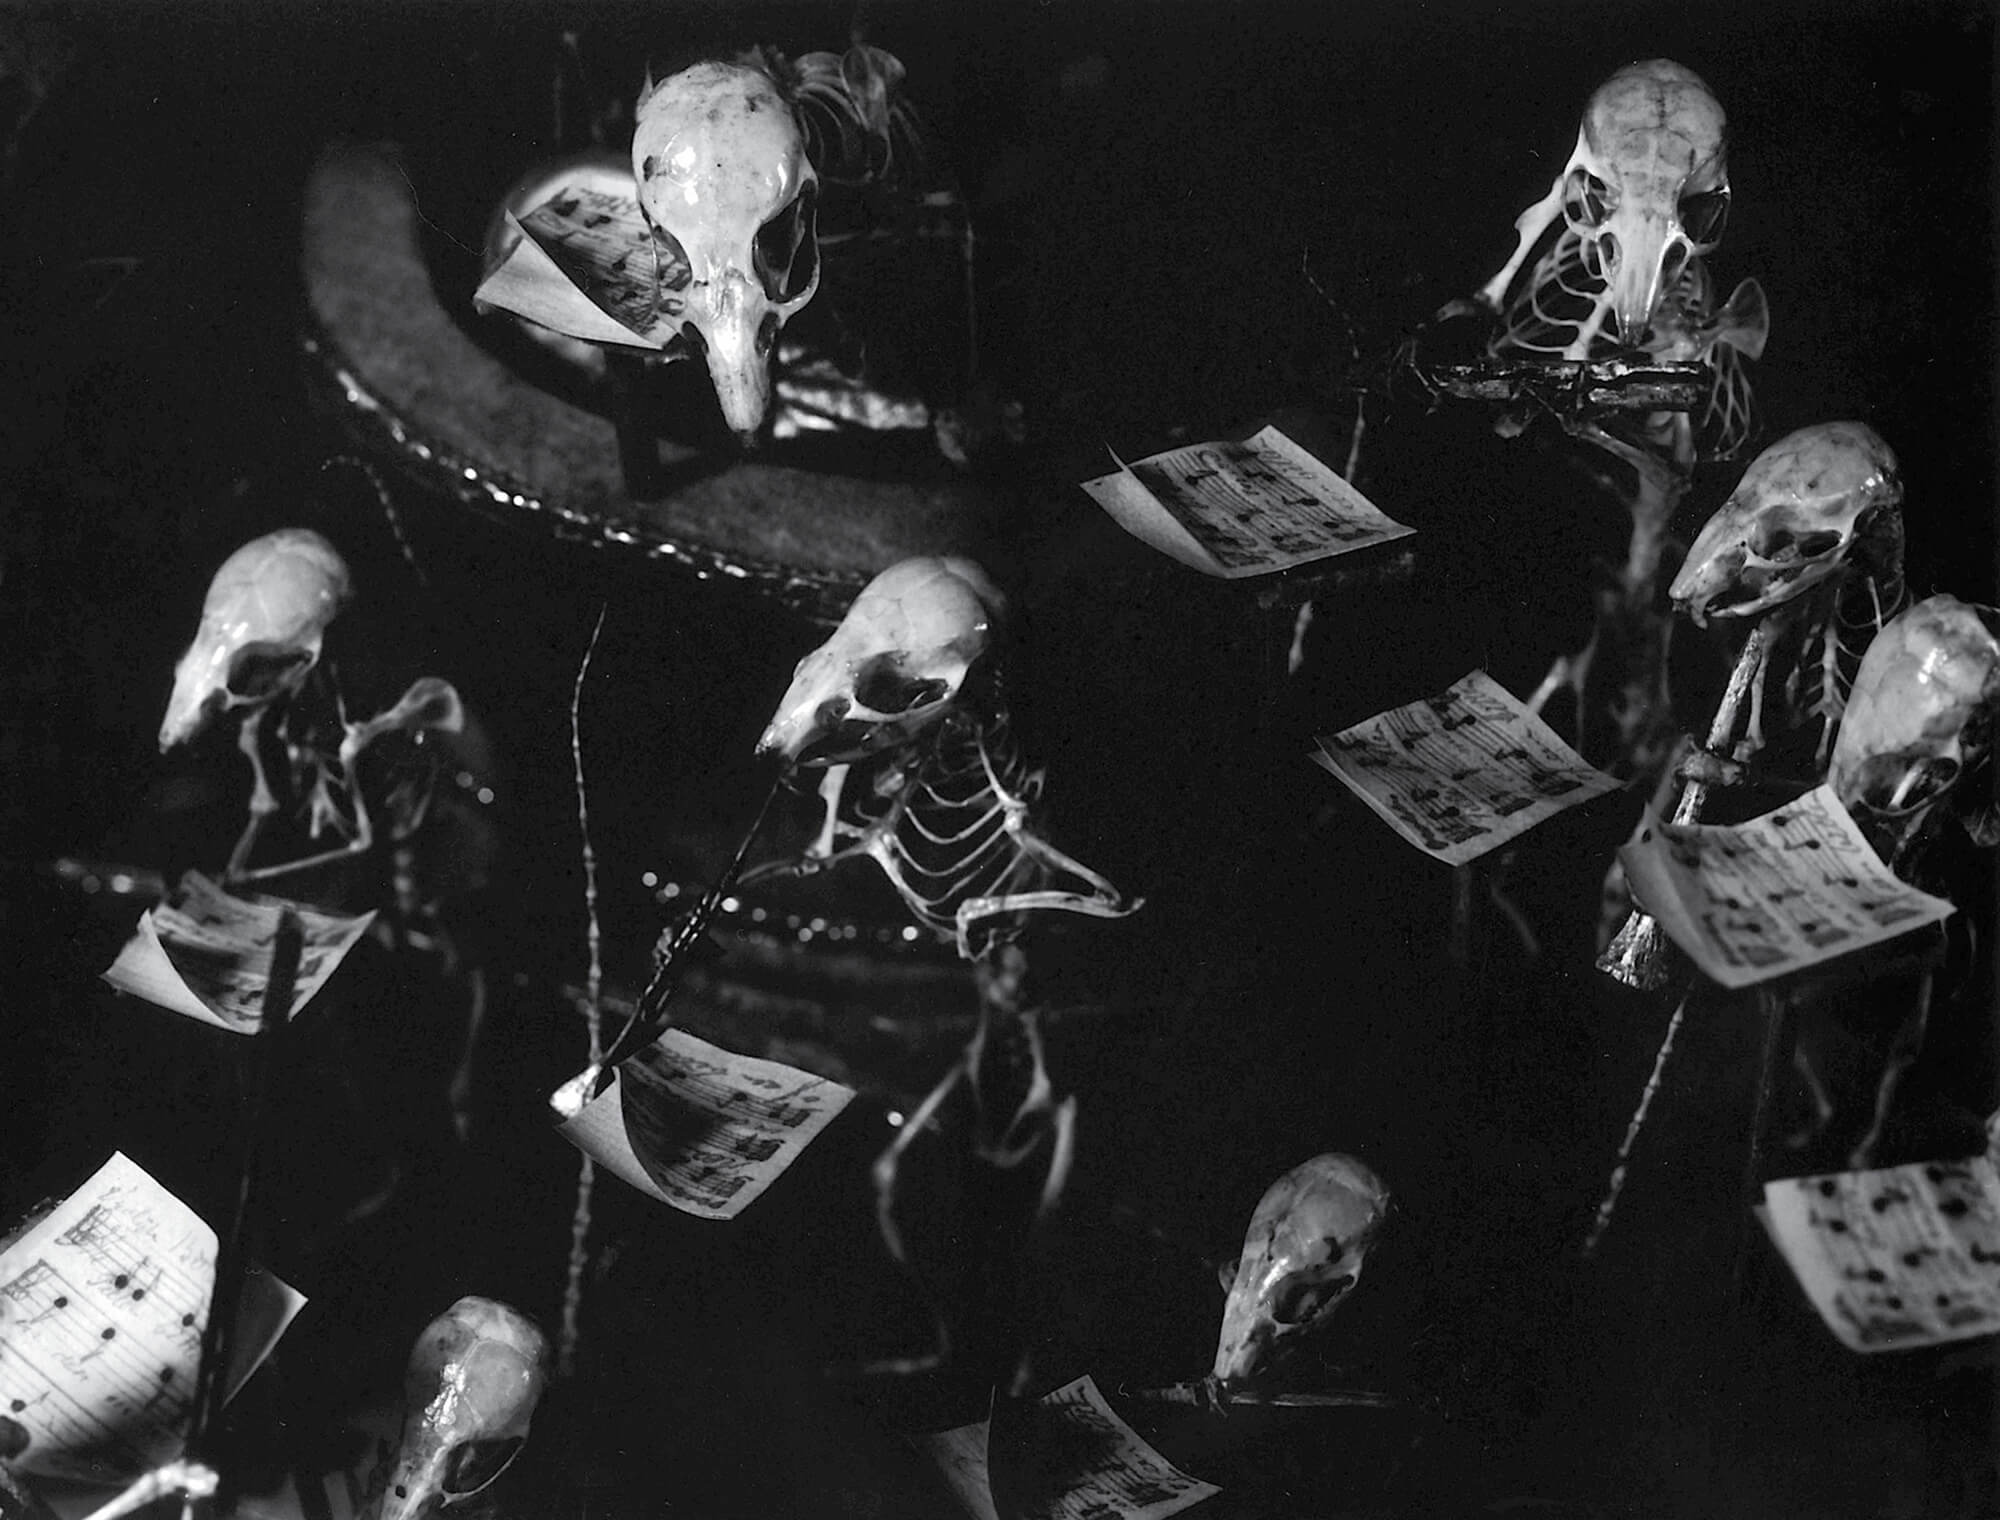 A photograph by Lena Herzog of fifty mice skeletons arrayed as a performing orchestra and attentive audience.